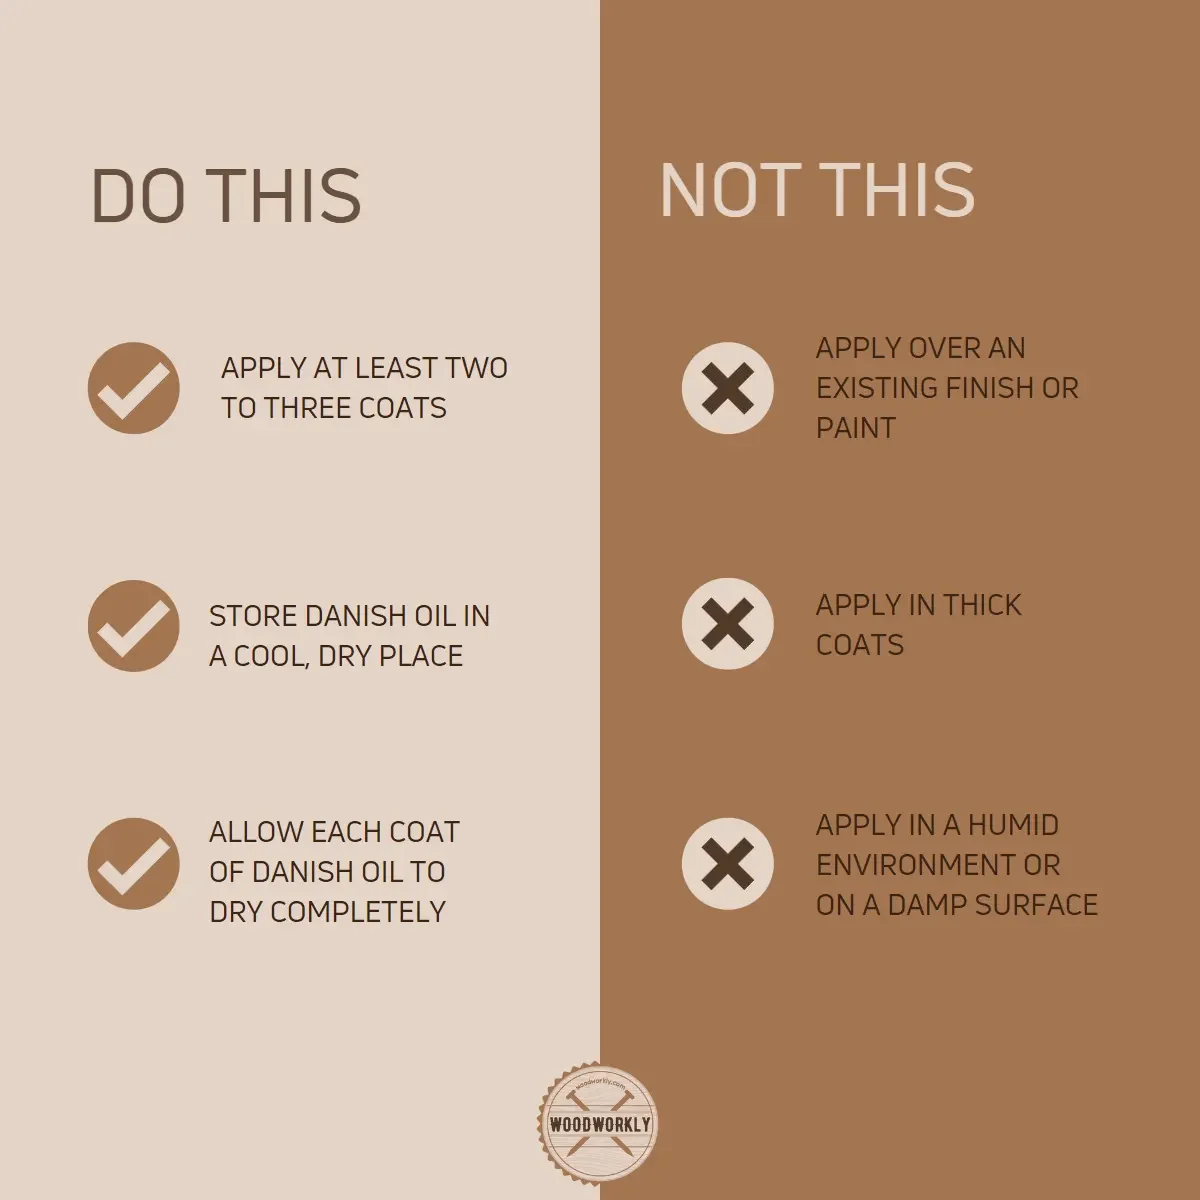 dos and don'ts to when using Danish oil